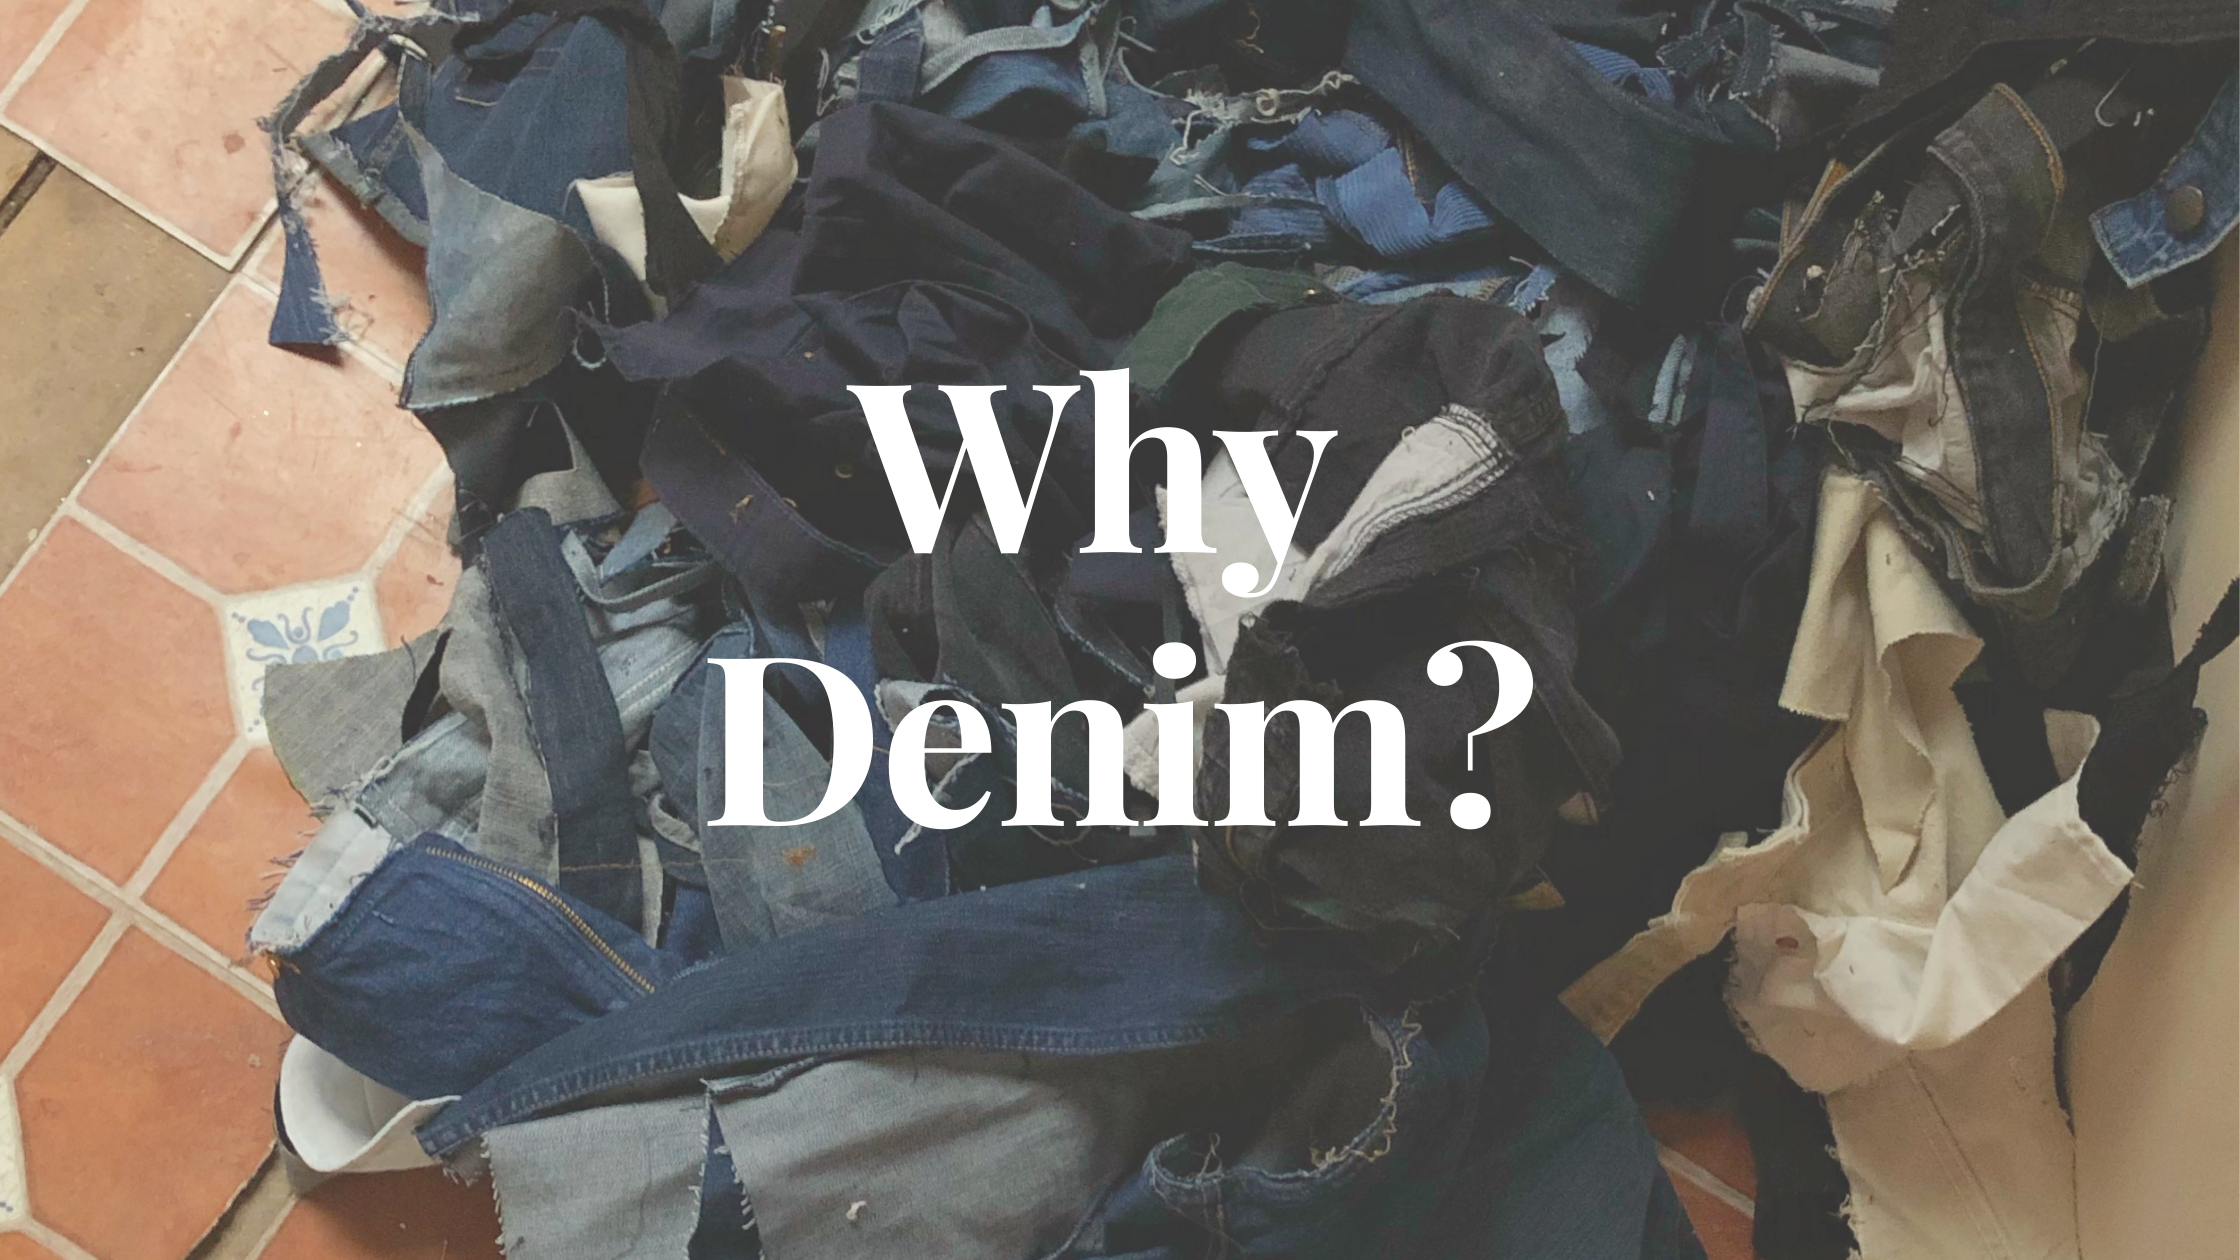 Pin by ReJean Denim, Sustainable Fas on Denim